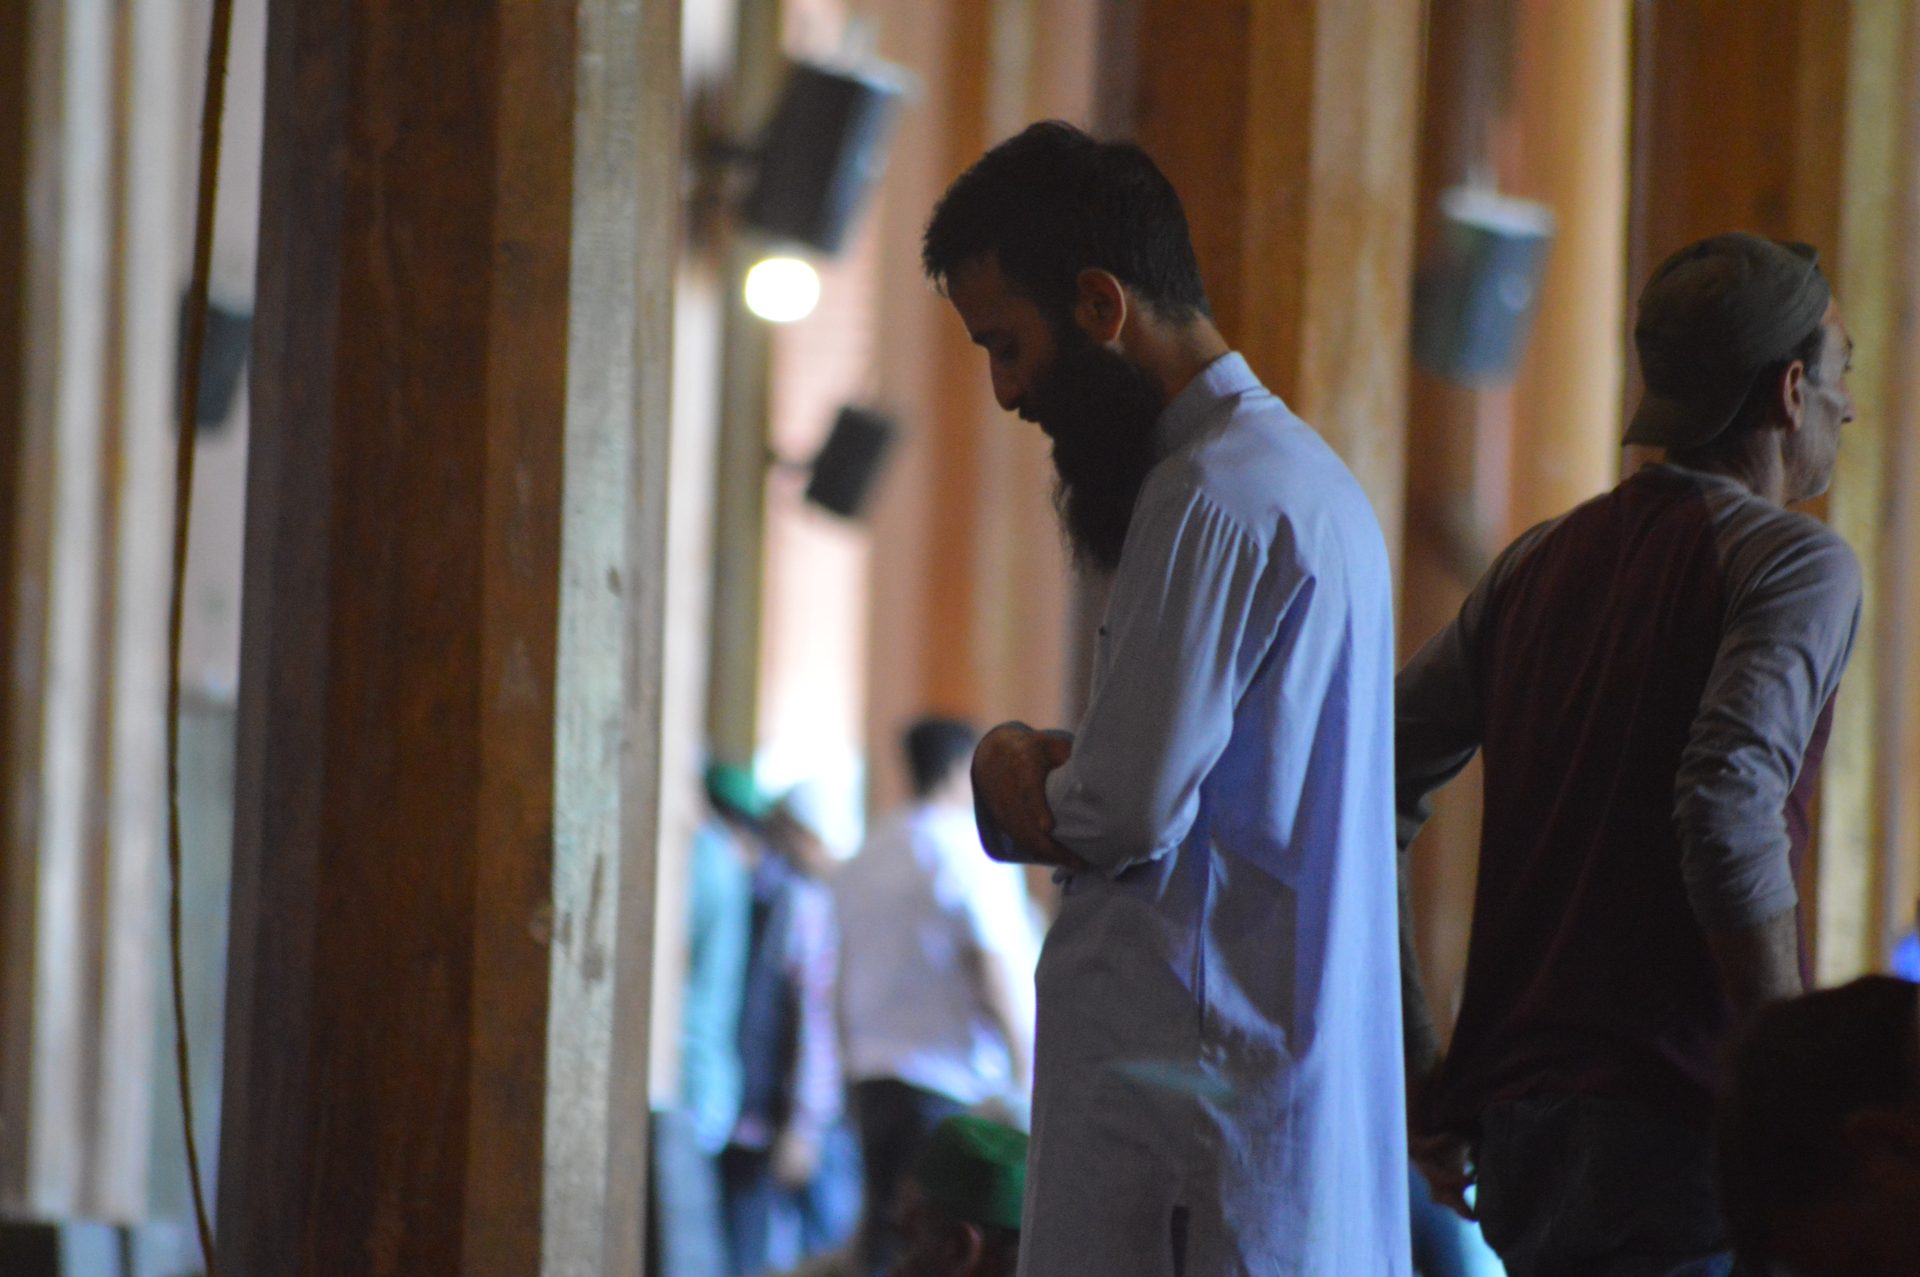 A muslim man praying in a mosque (side profile)